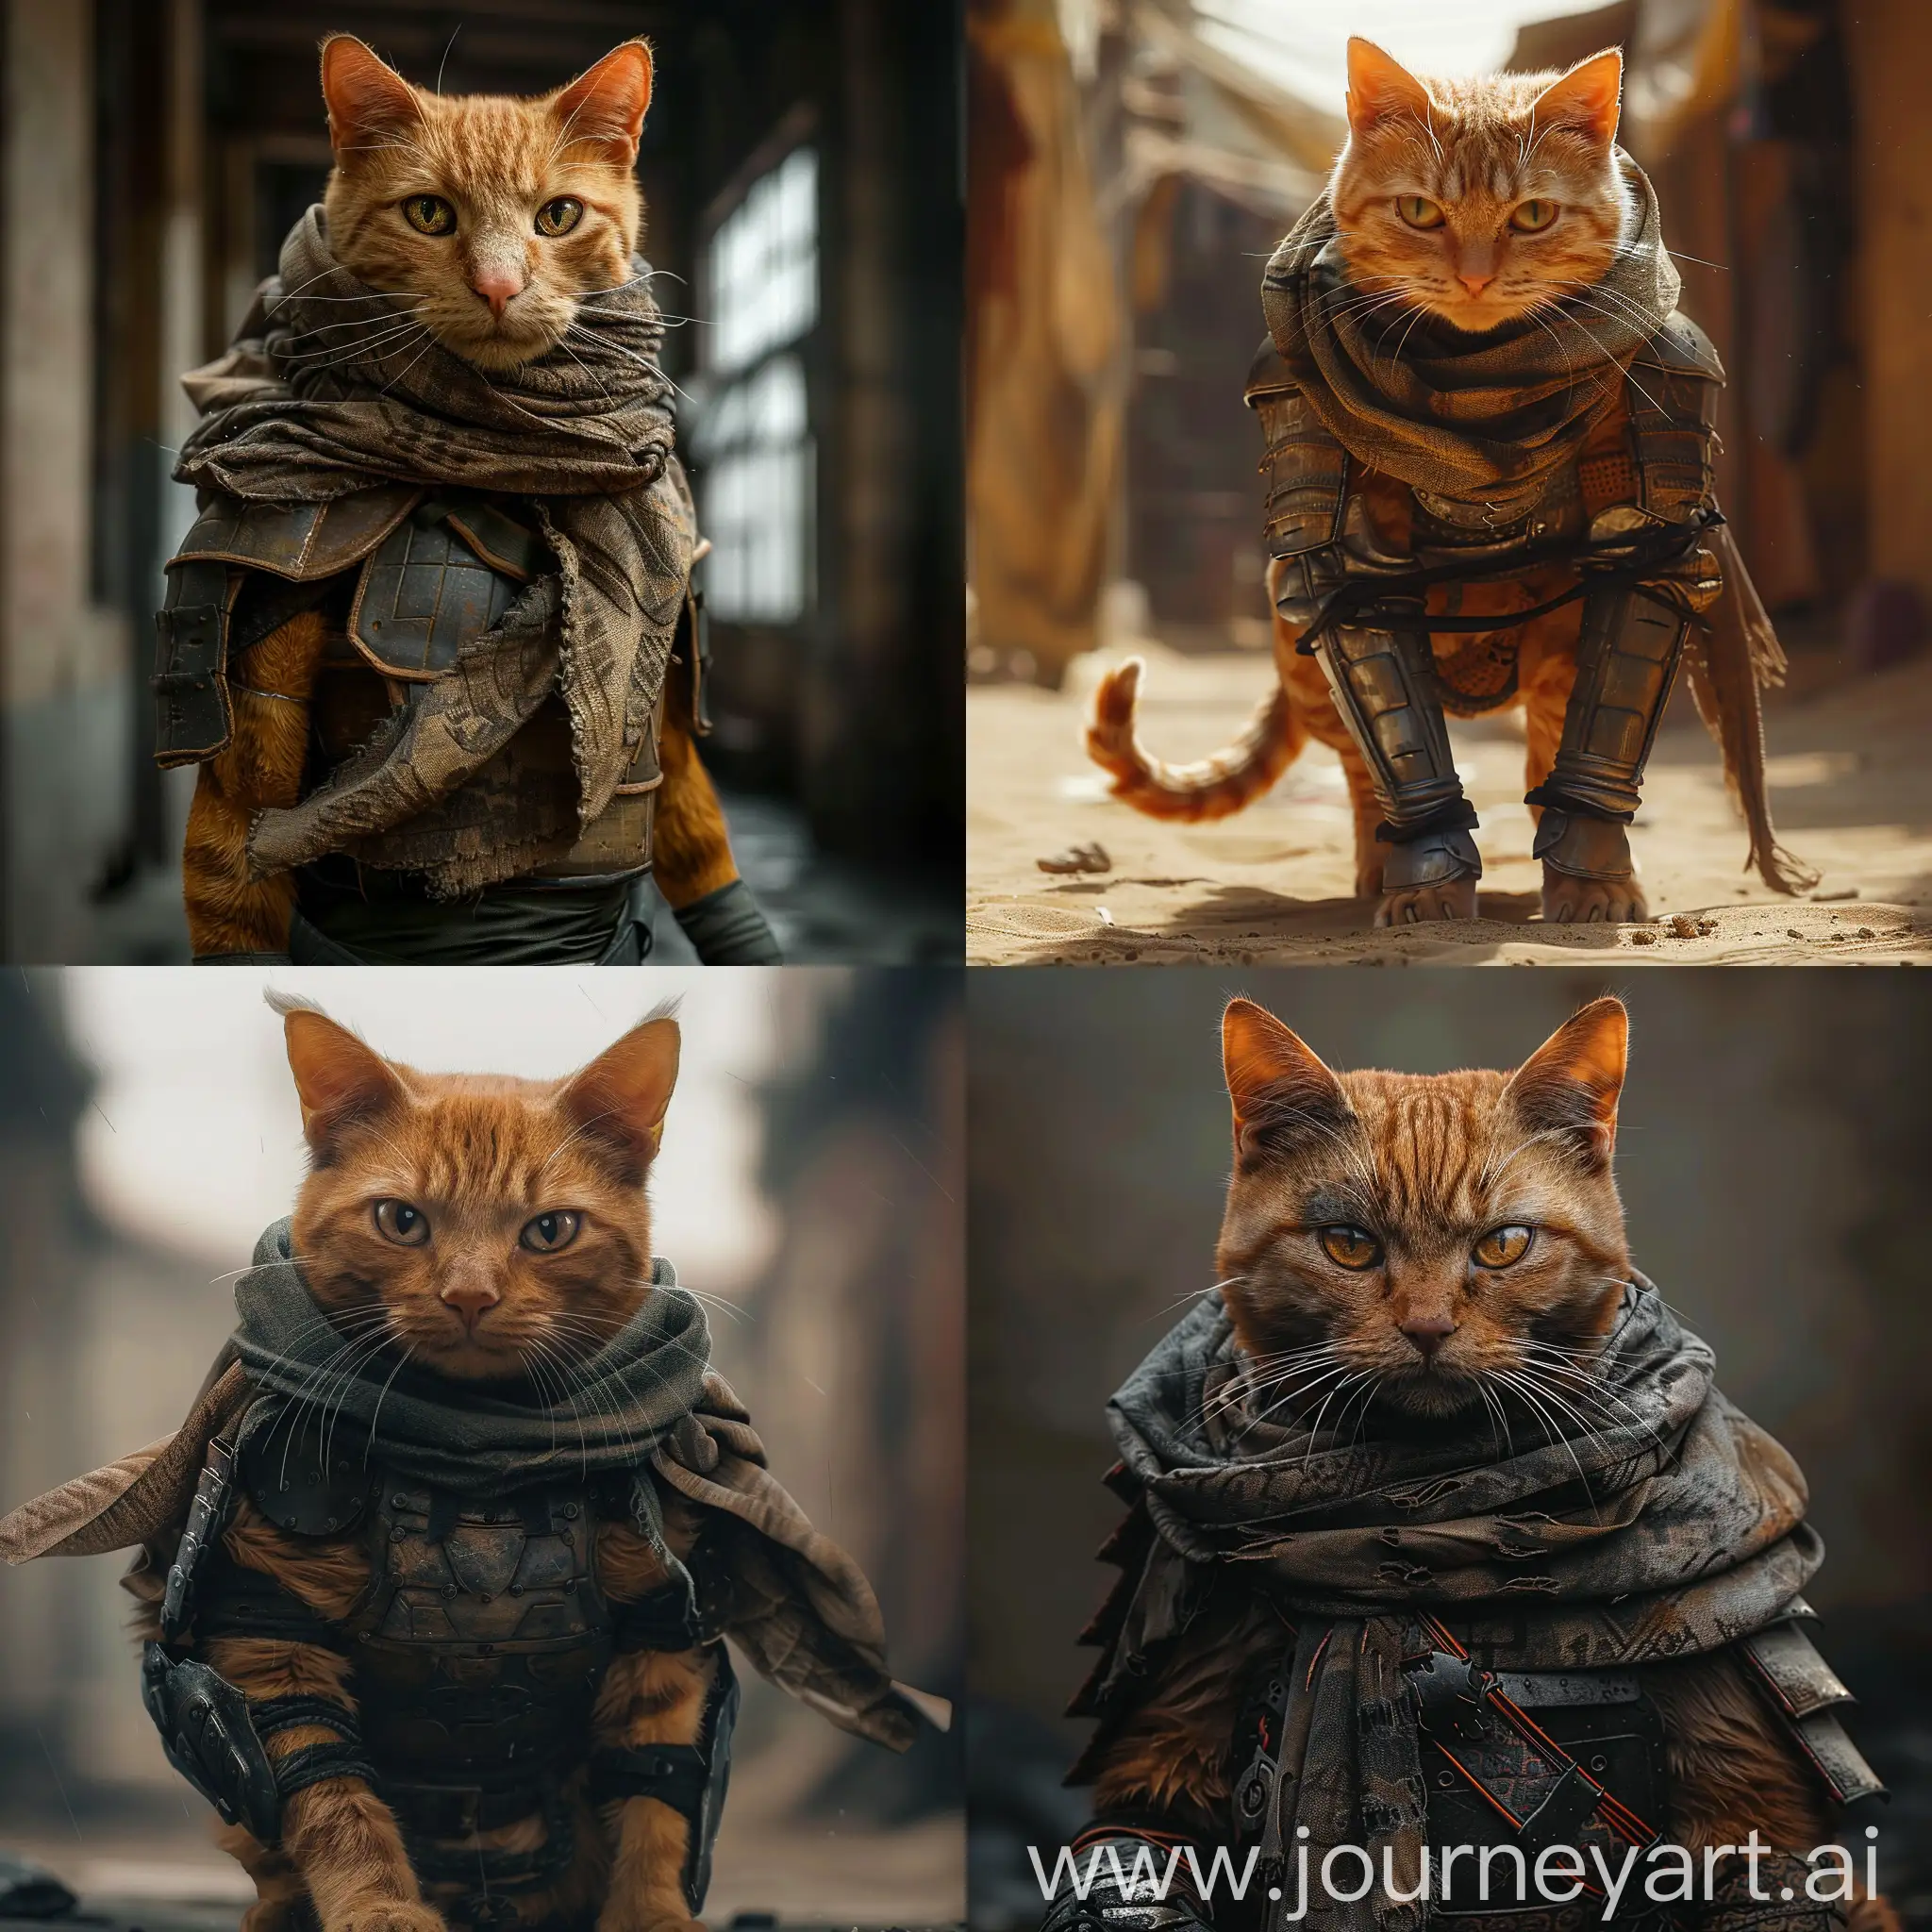 Stealthy-Ninja-Cat-in-Cinematic-Armor-and-Scarf-Hyper-Realistic-Art